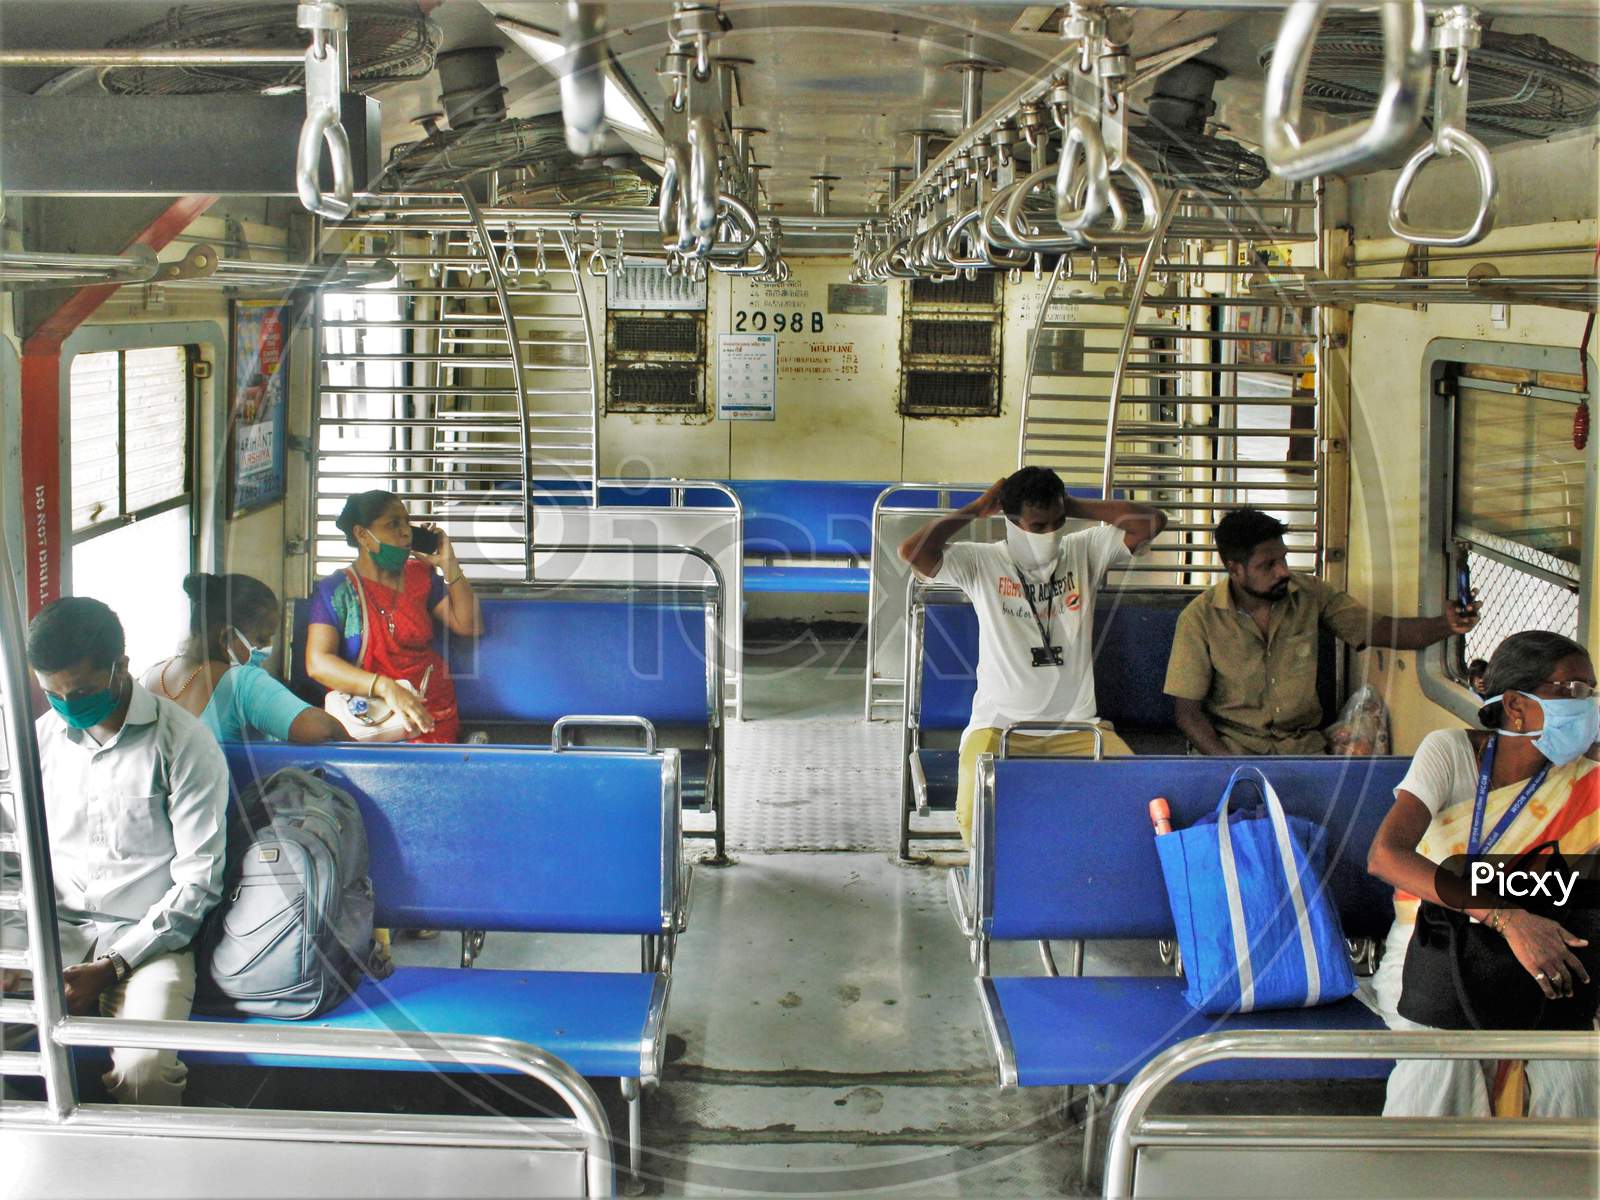 Passengers sit inside the train scheduled for essential service workers after the government eased a nationwide lockdown which was imposed as a preventive measure against the COVID-19 coronavirus, at CST local train station, in Mumbai, India, on June 15, 2020.